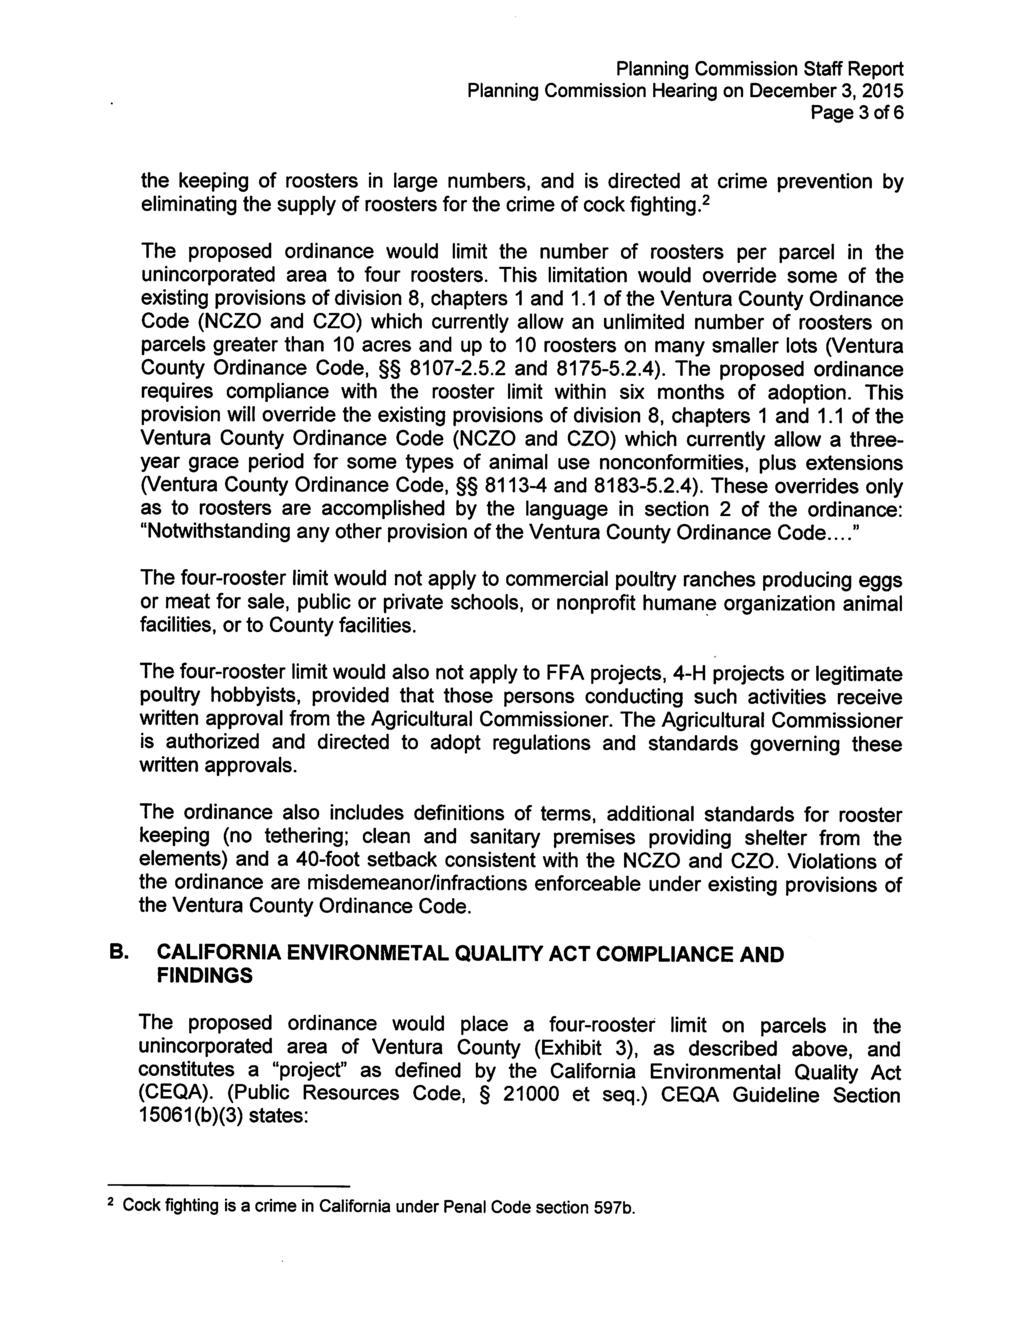 Planning Commission Staff Report Planning Commission Hearing on December 3, 2015 Page 3 of 6 the keeping of roosters in large numbers, and is directed at crime prevention by eliminating the supply of